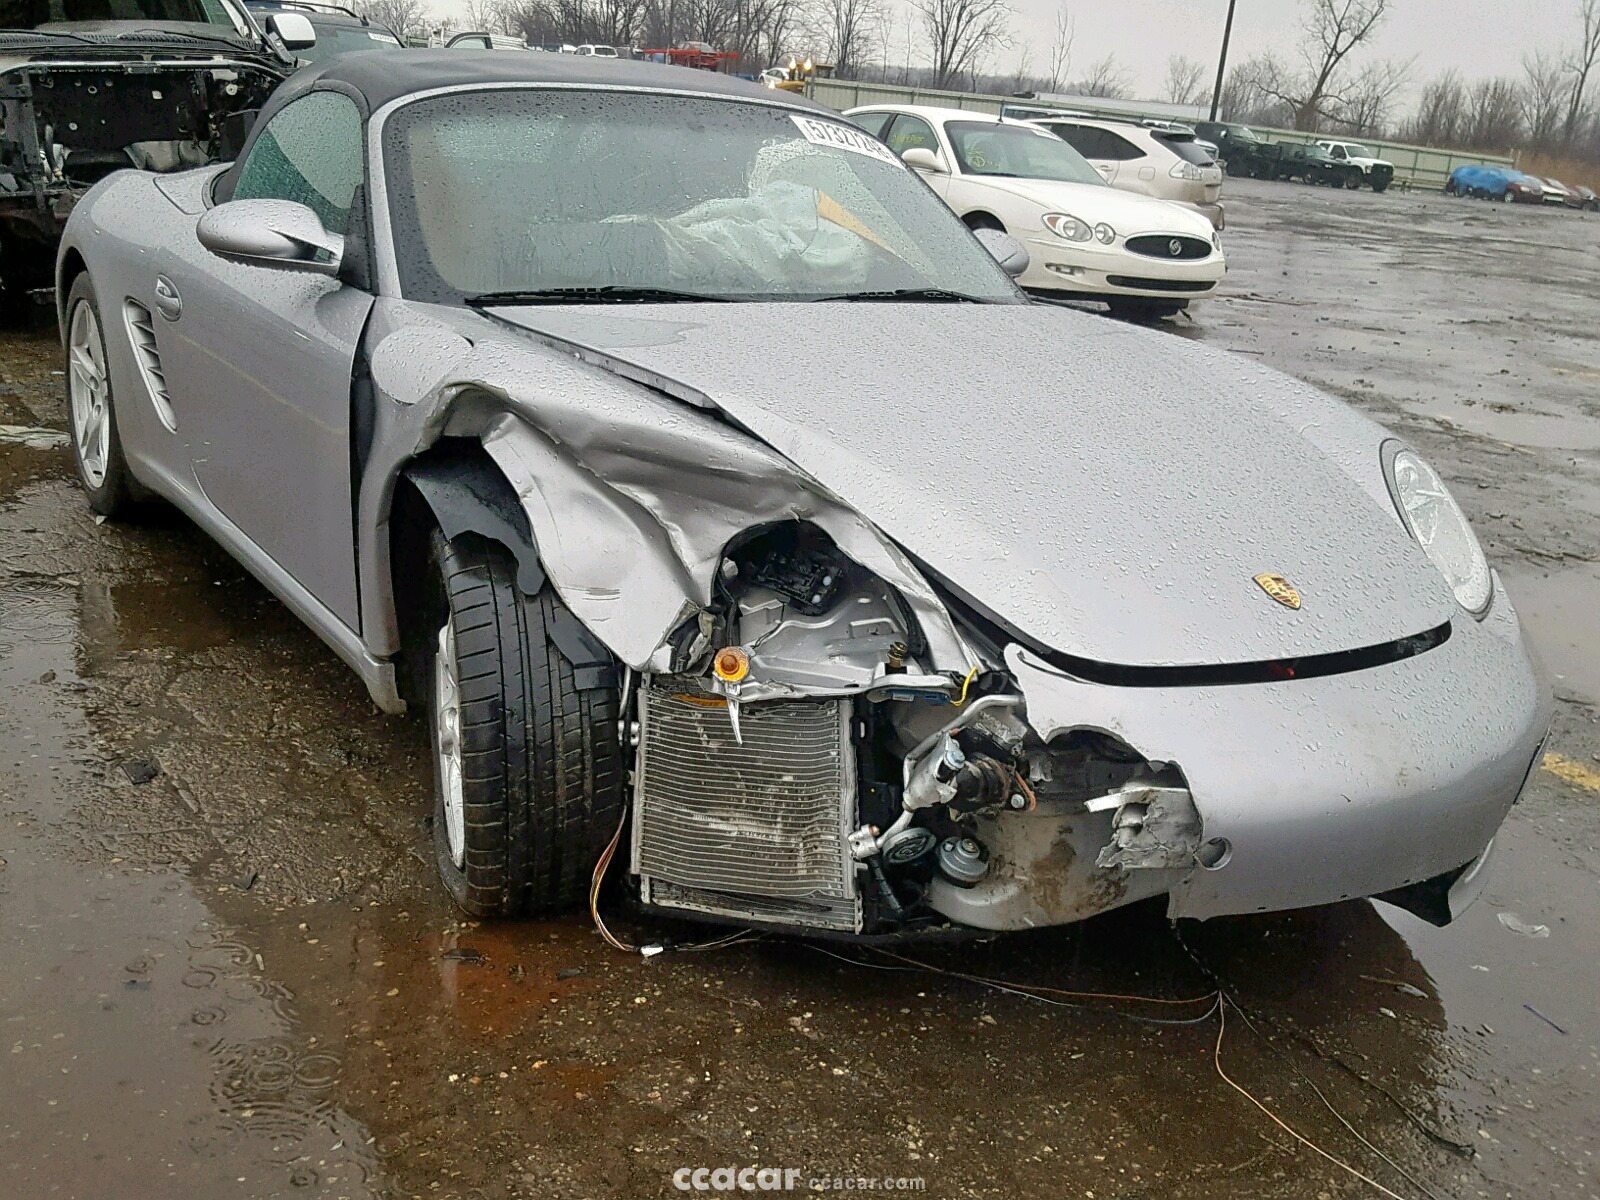 2006 Porsche Boxster S Salvage And Damaged Cars For Sale